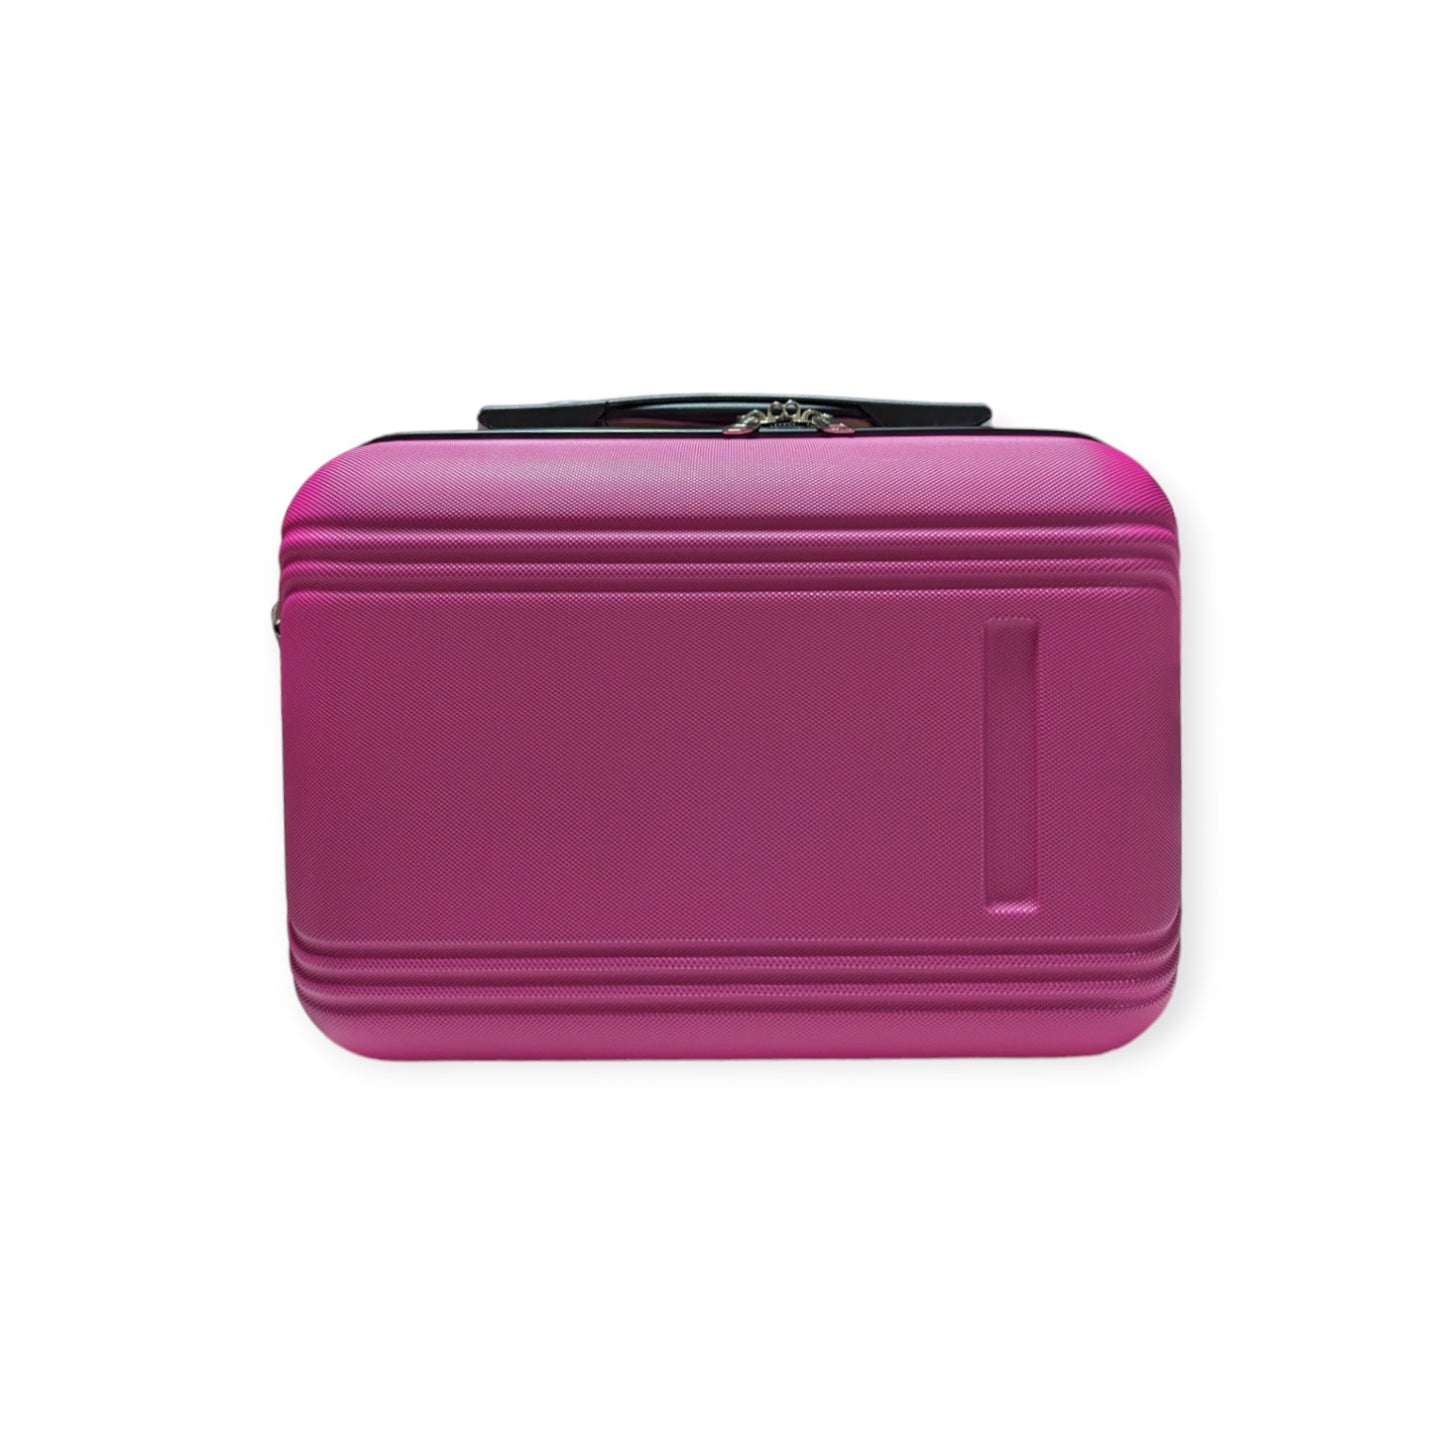 Elegant Collection Pink Luggage (Beauty case /20/26/28/30") Suitcase Lock Spinner